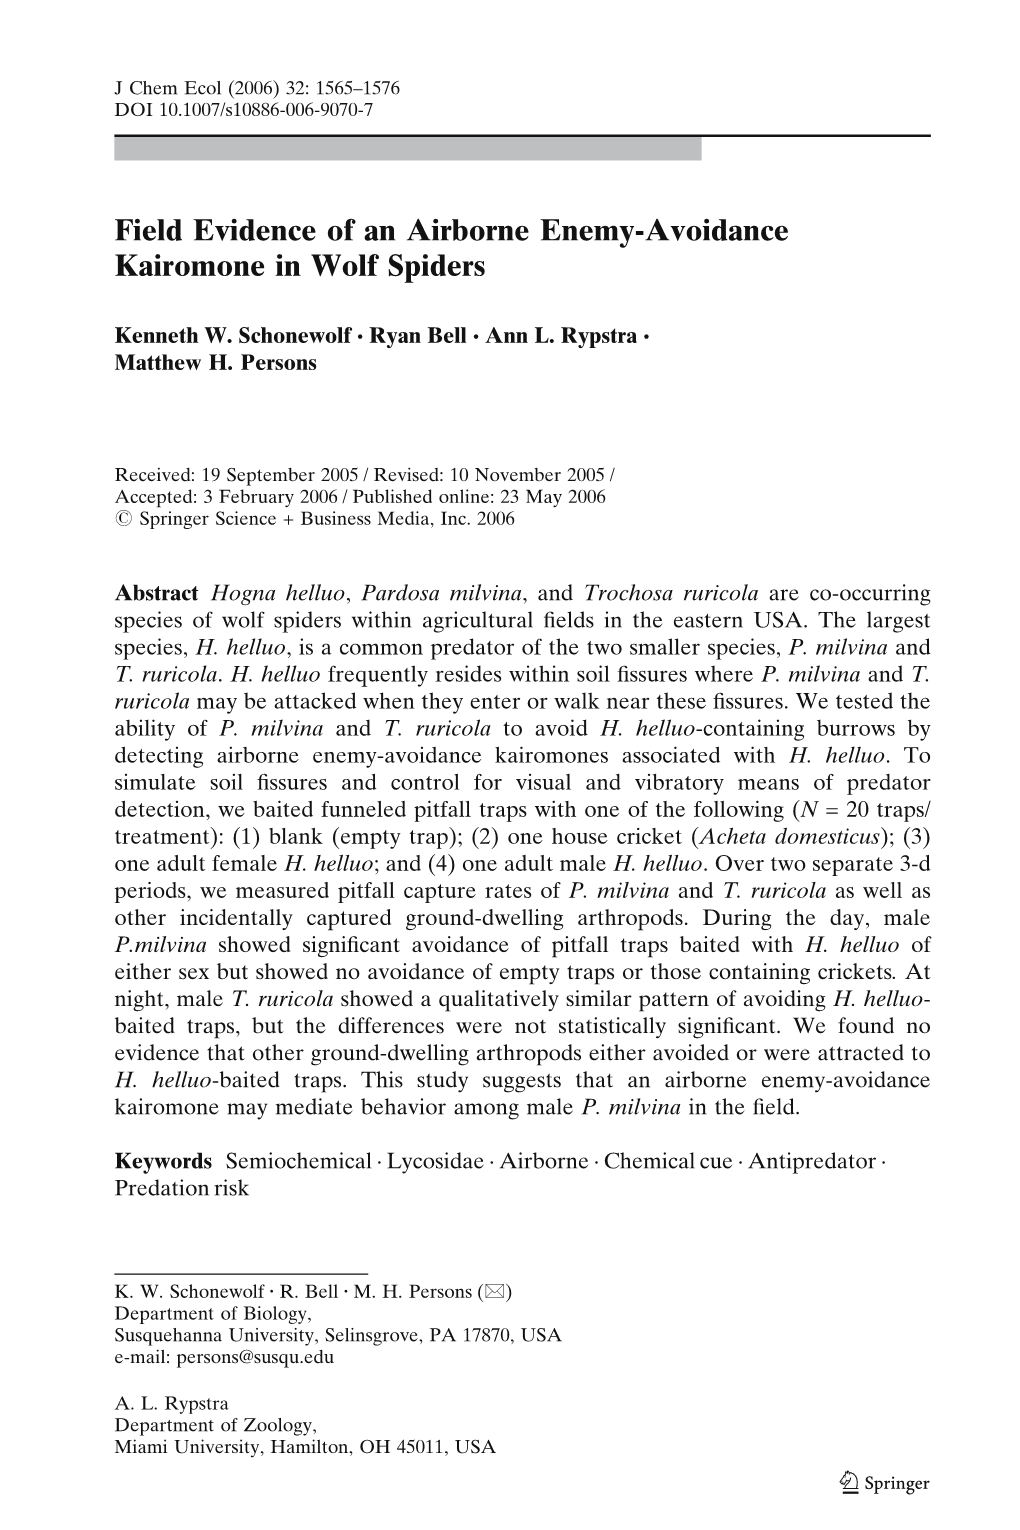 Field Evidence of an Airborne Enemy-Avoidance Kairomone in Wolf Spiders